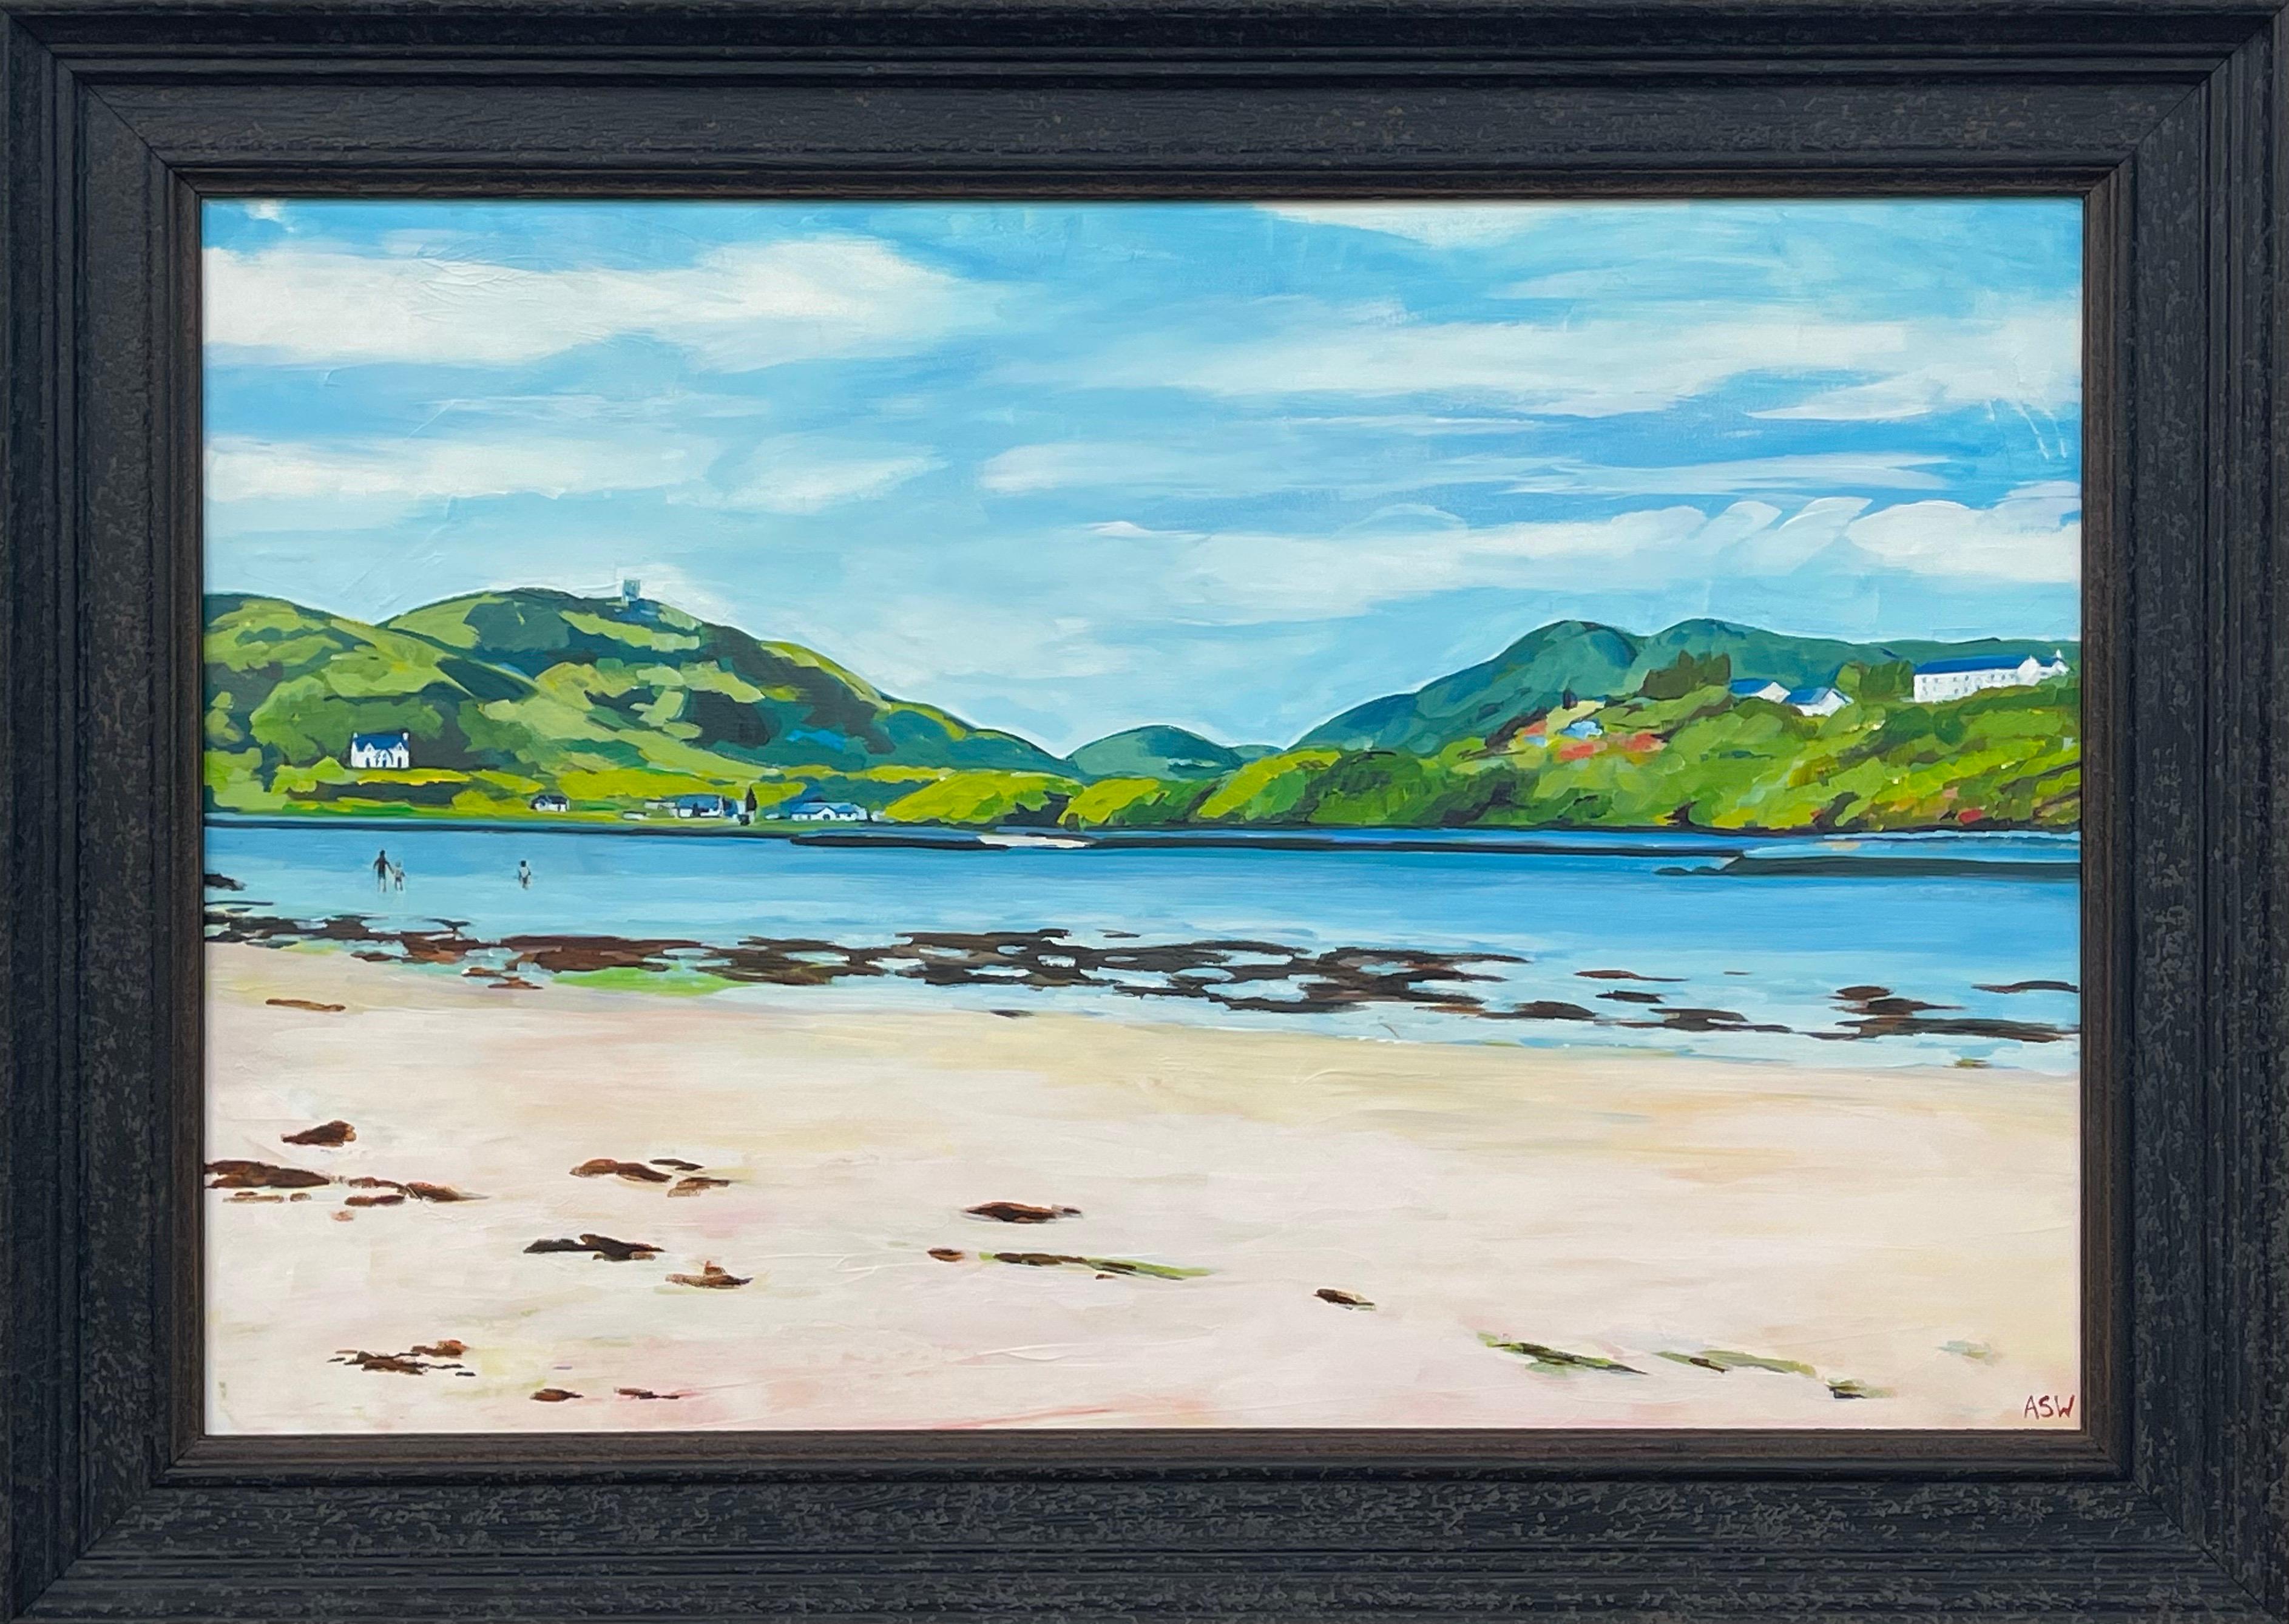 Angela Wakefield Landscape Painting - White Sandy Beach near Isle of Skye in Scottish Highlands by Contemporary Artist